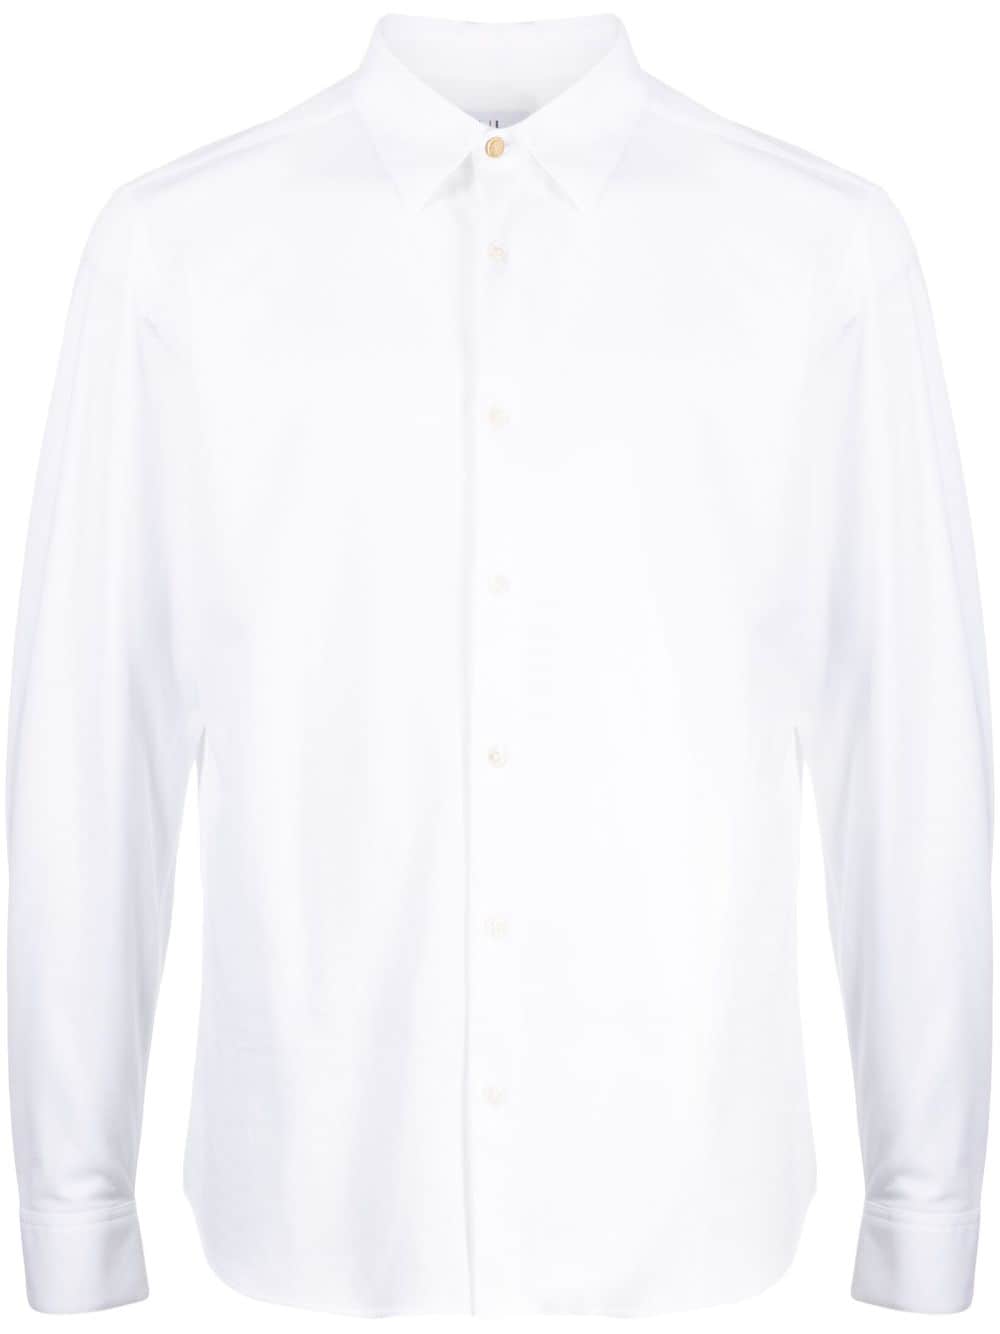 Dunhill long-sleeved cotton shirt - White